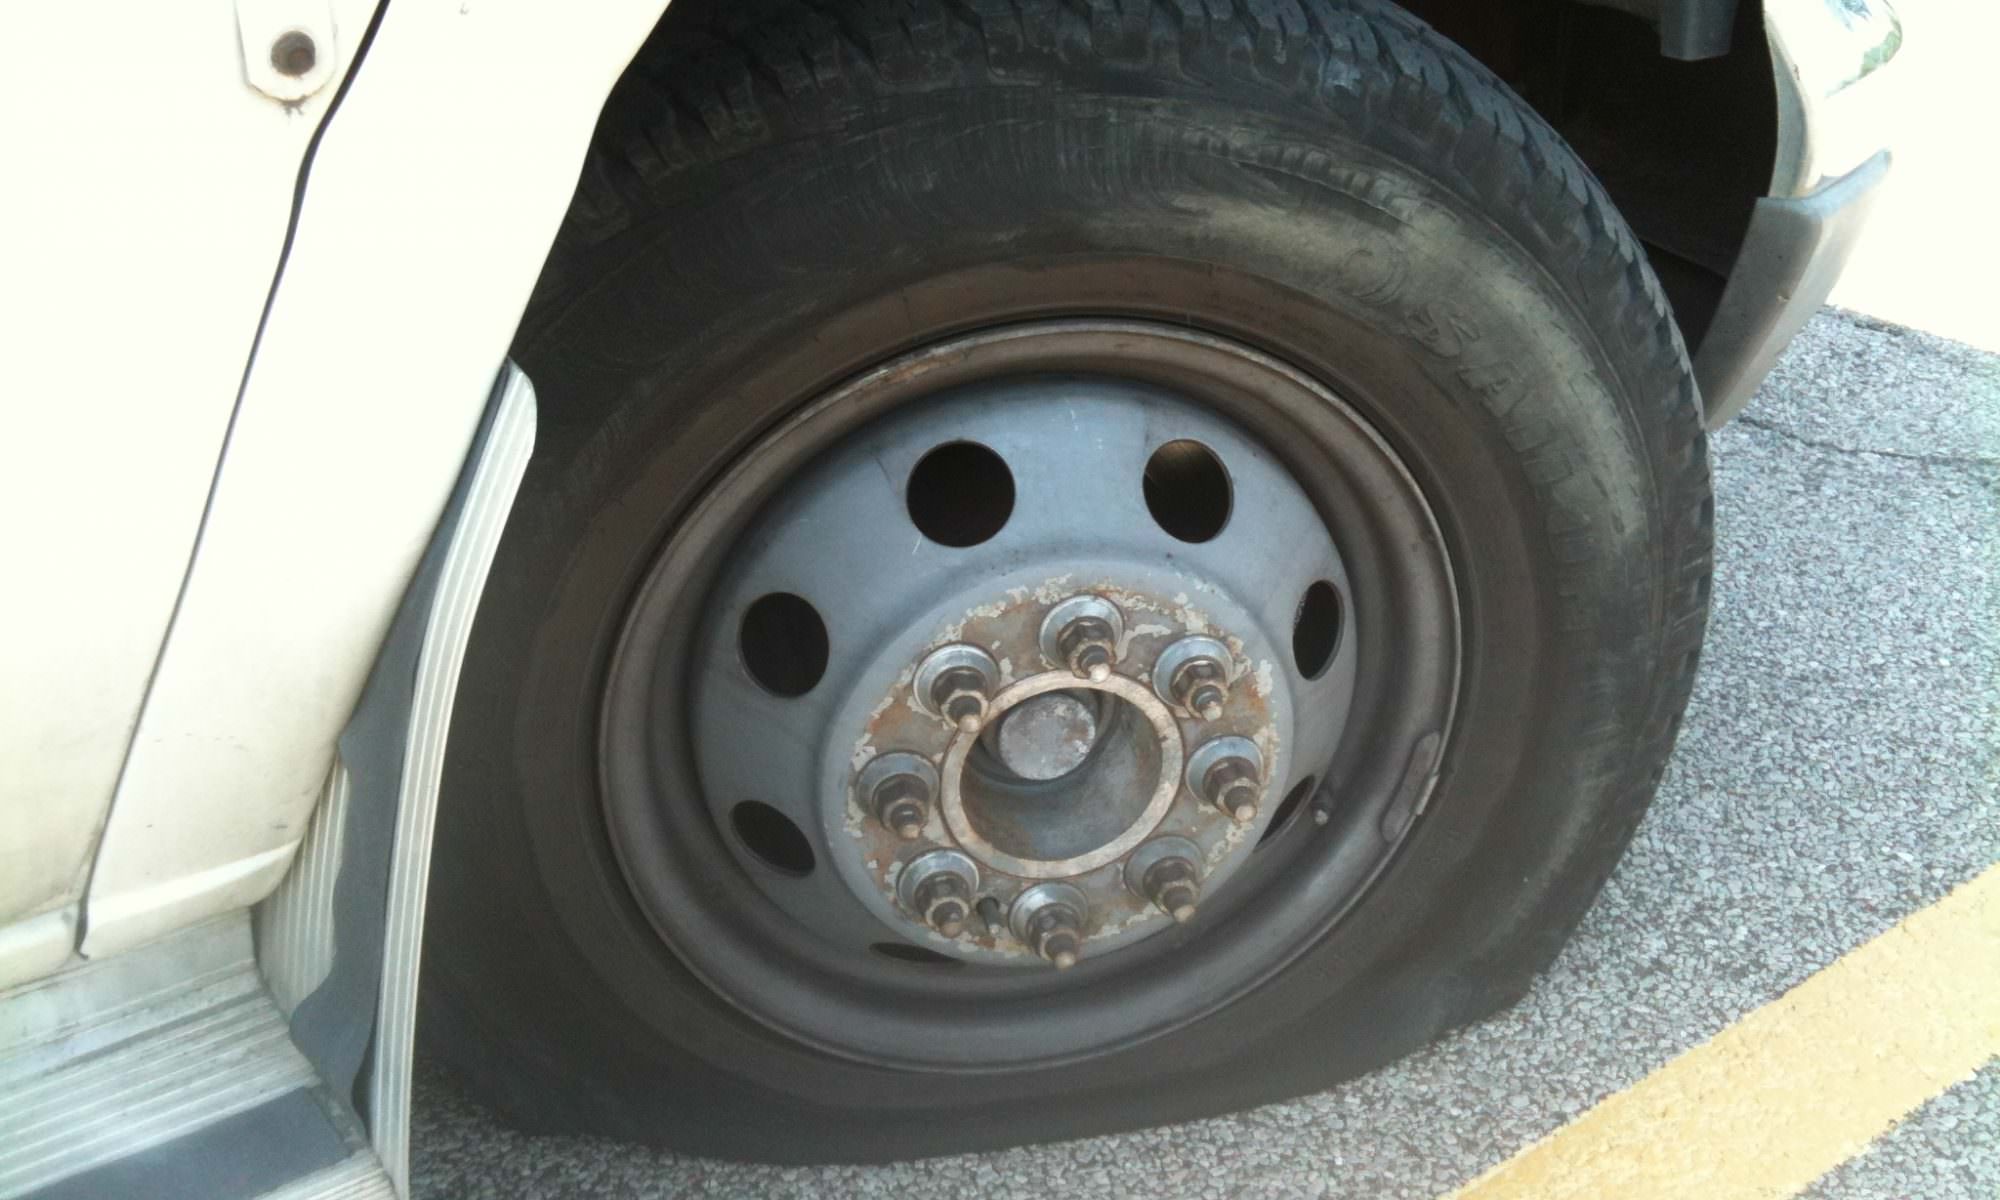 The flat tire took the air out of our tour spirit